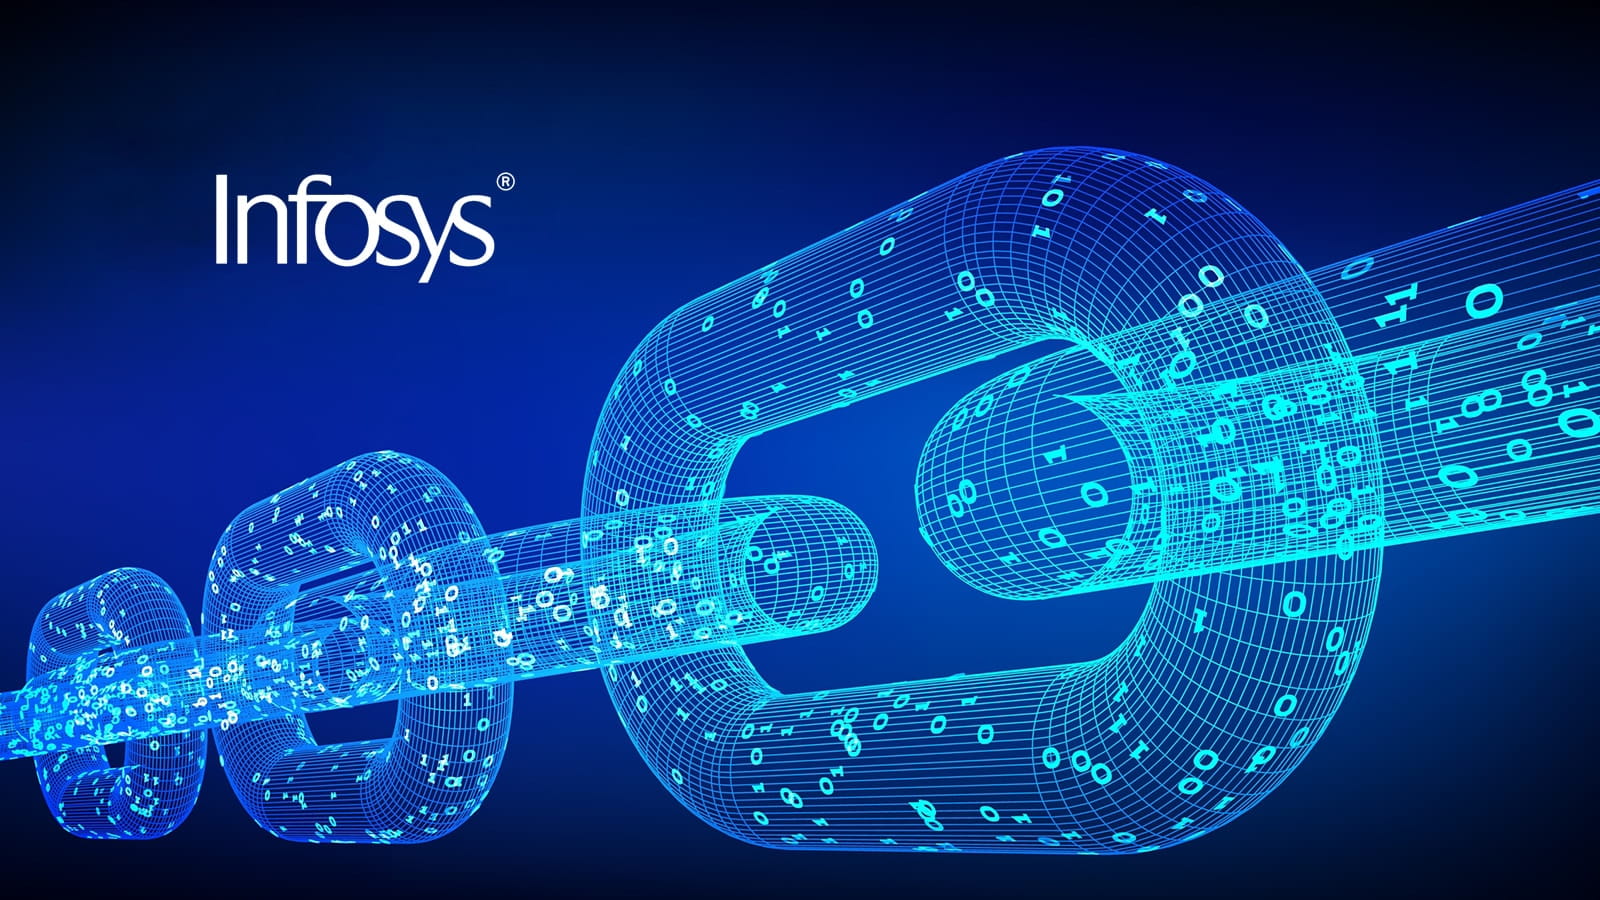 Infosys Finacle and R3 Conclude Global Trial of Blockchain Based Trade Finance